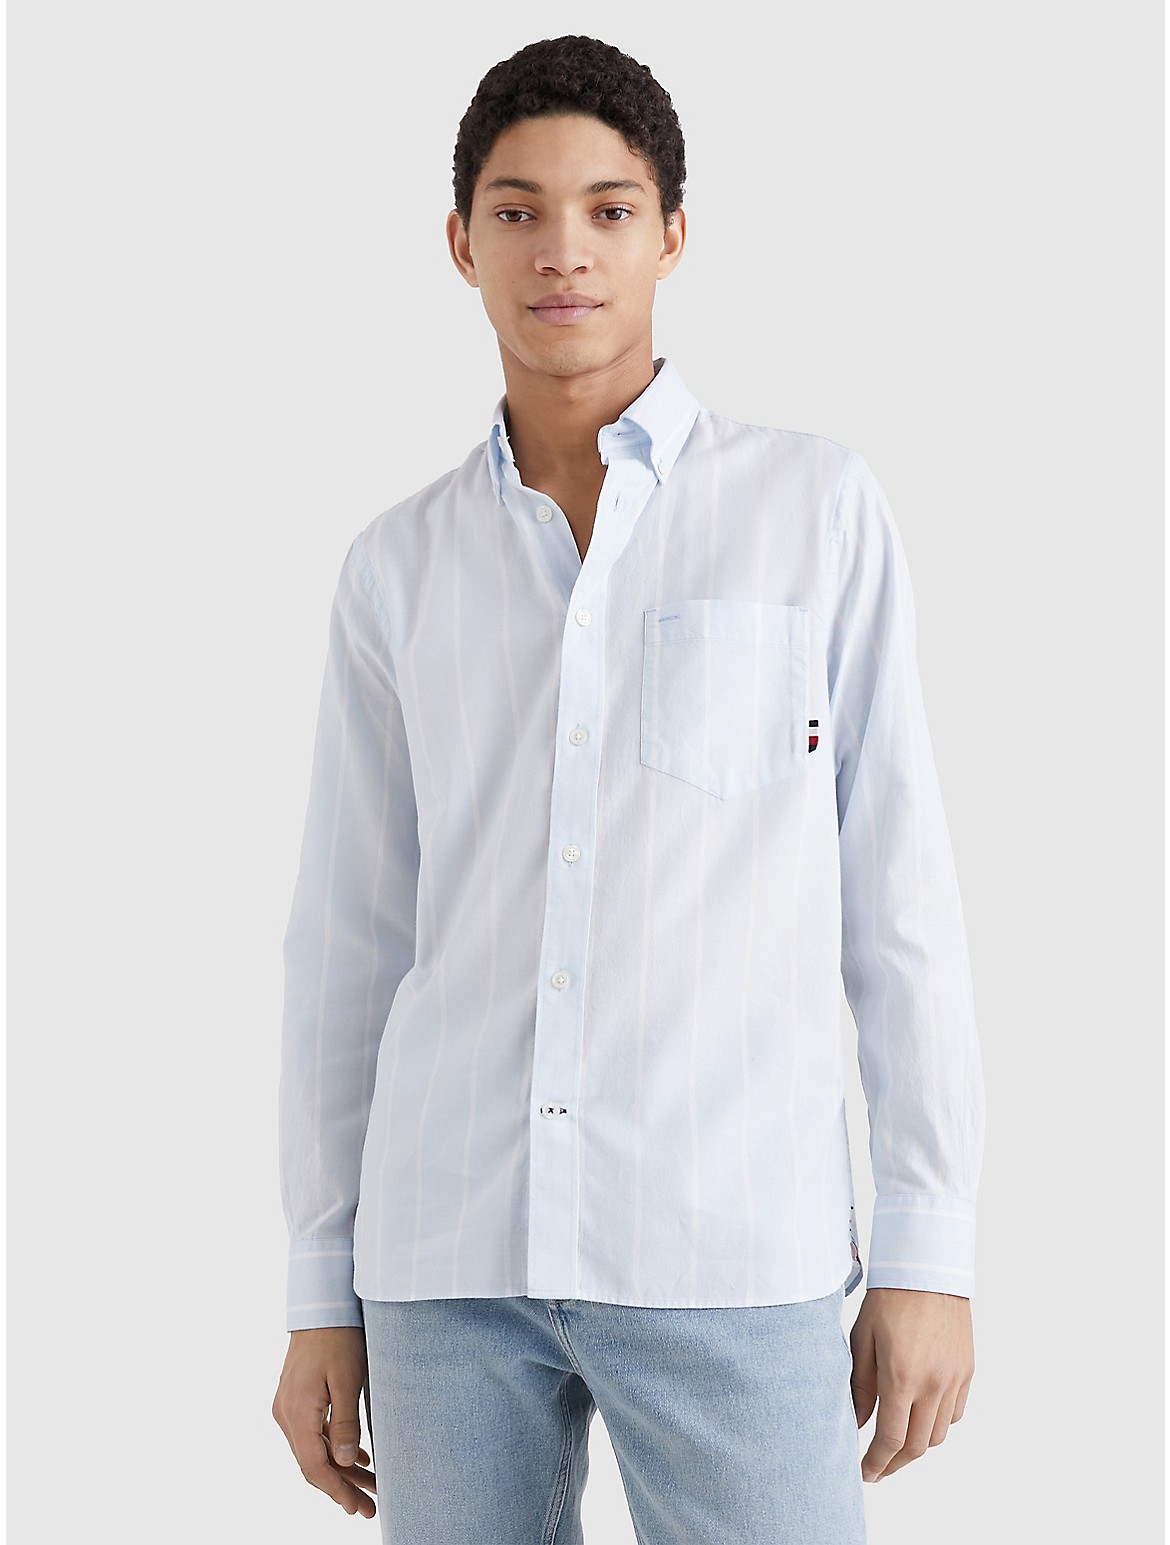 Fit Tommy Optic Shirt ModeSens Regular Blue White Hilfiger / Striped Oxford | In Breezy